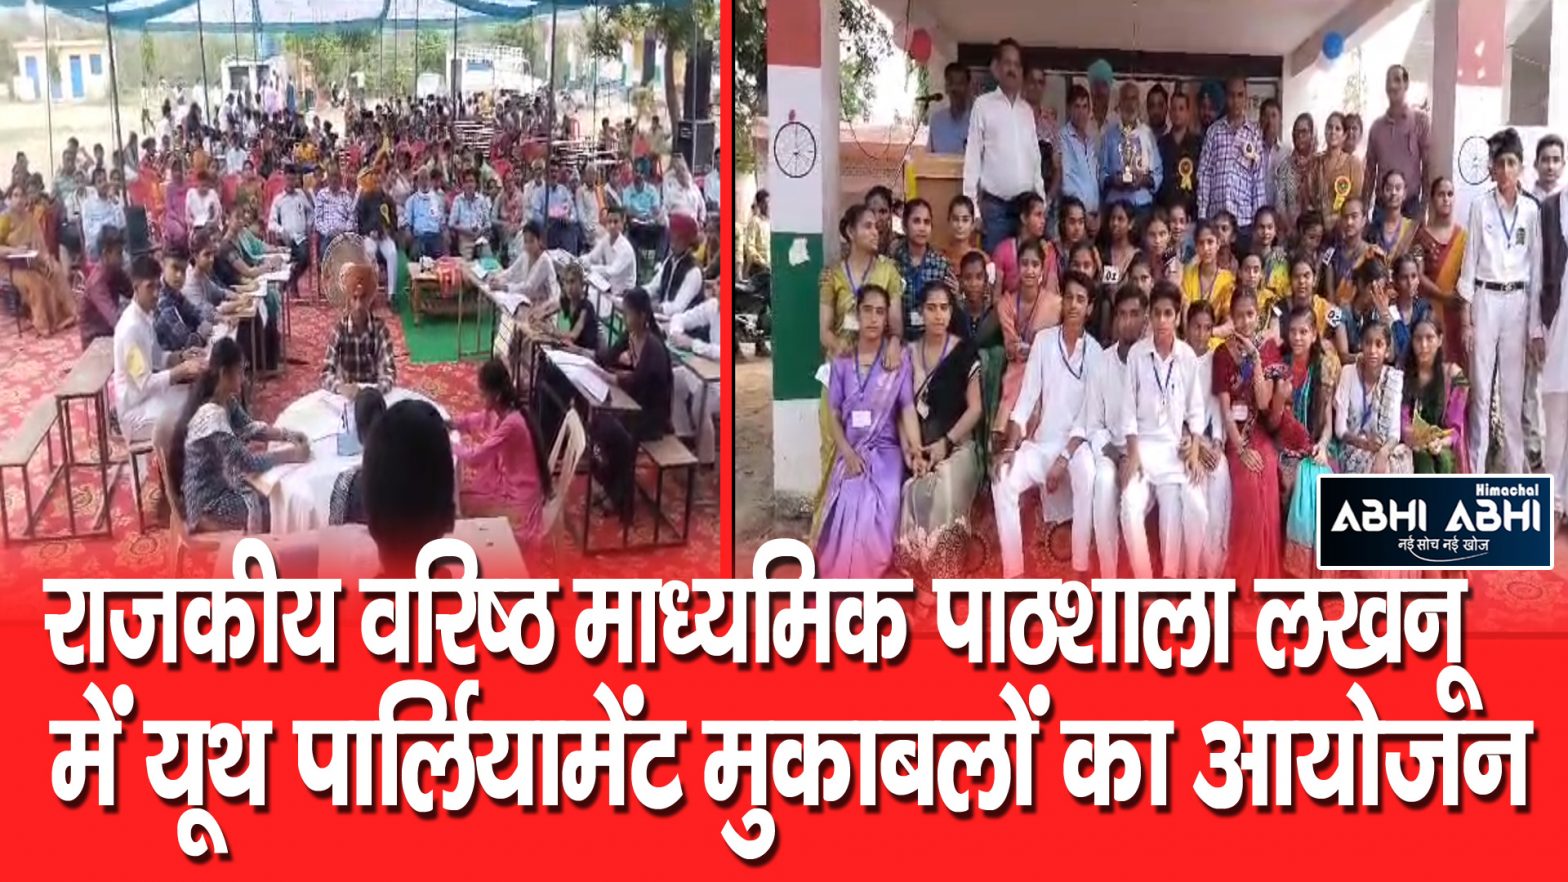 Youth parliament/ Naina devi / Competition/